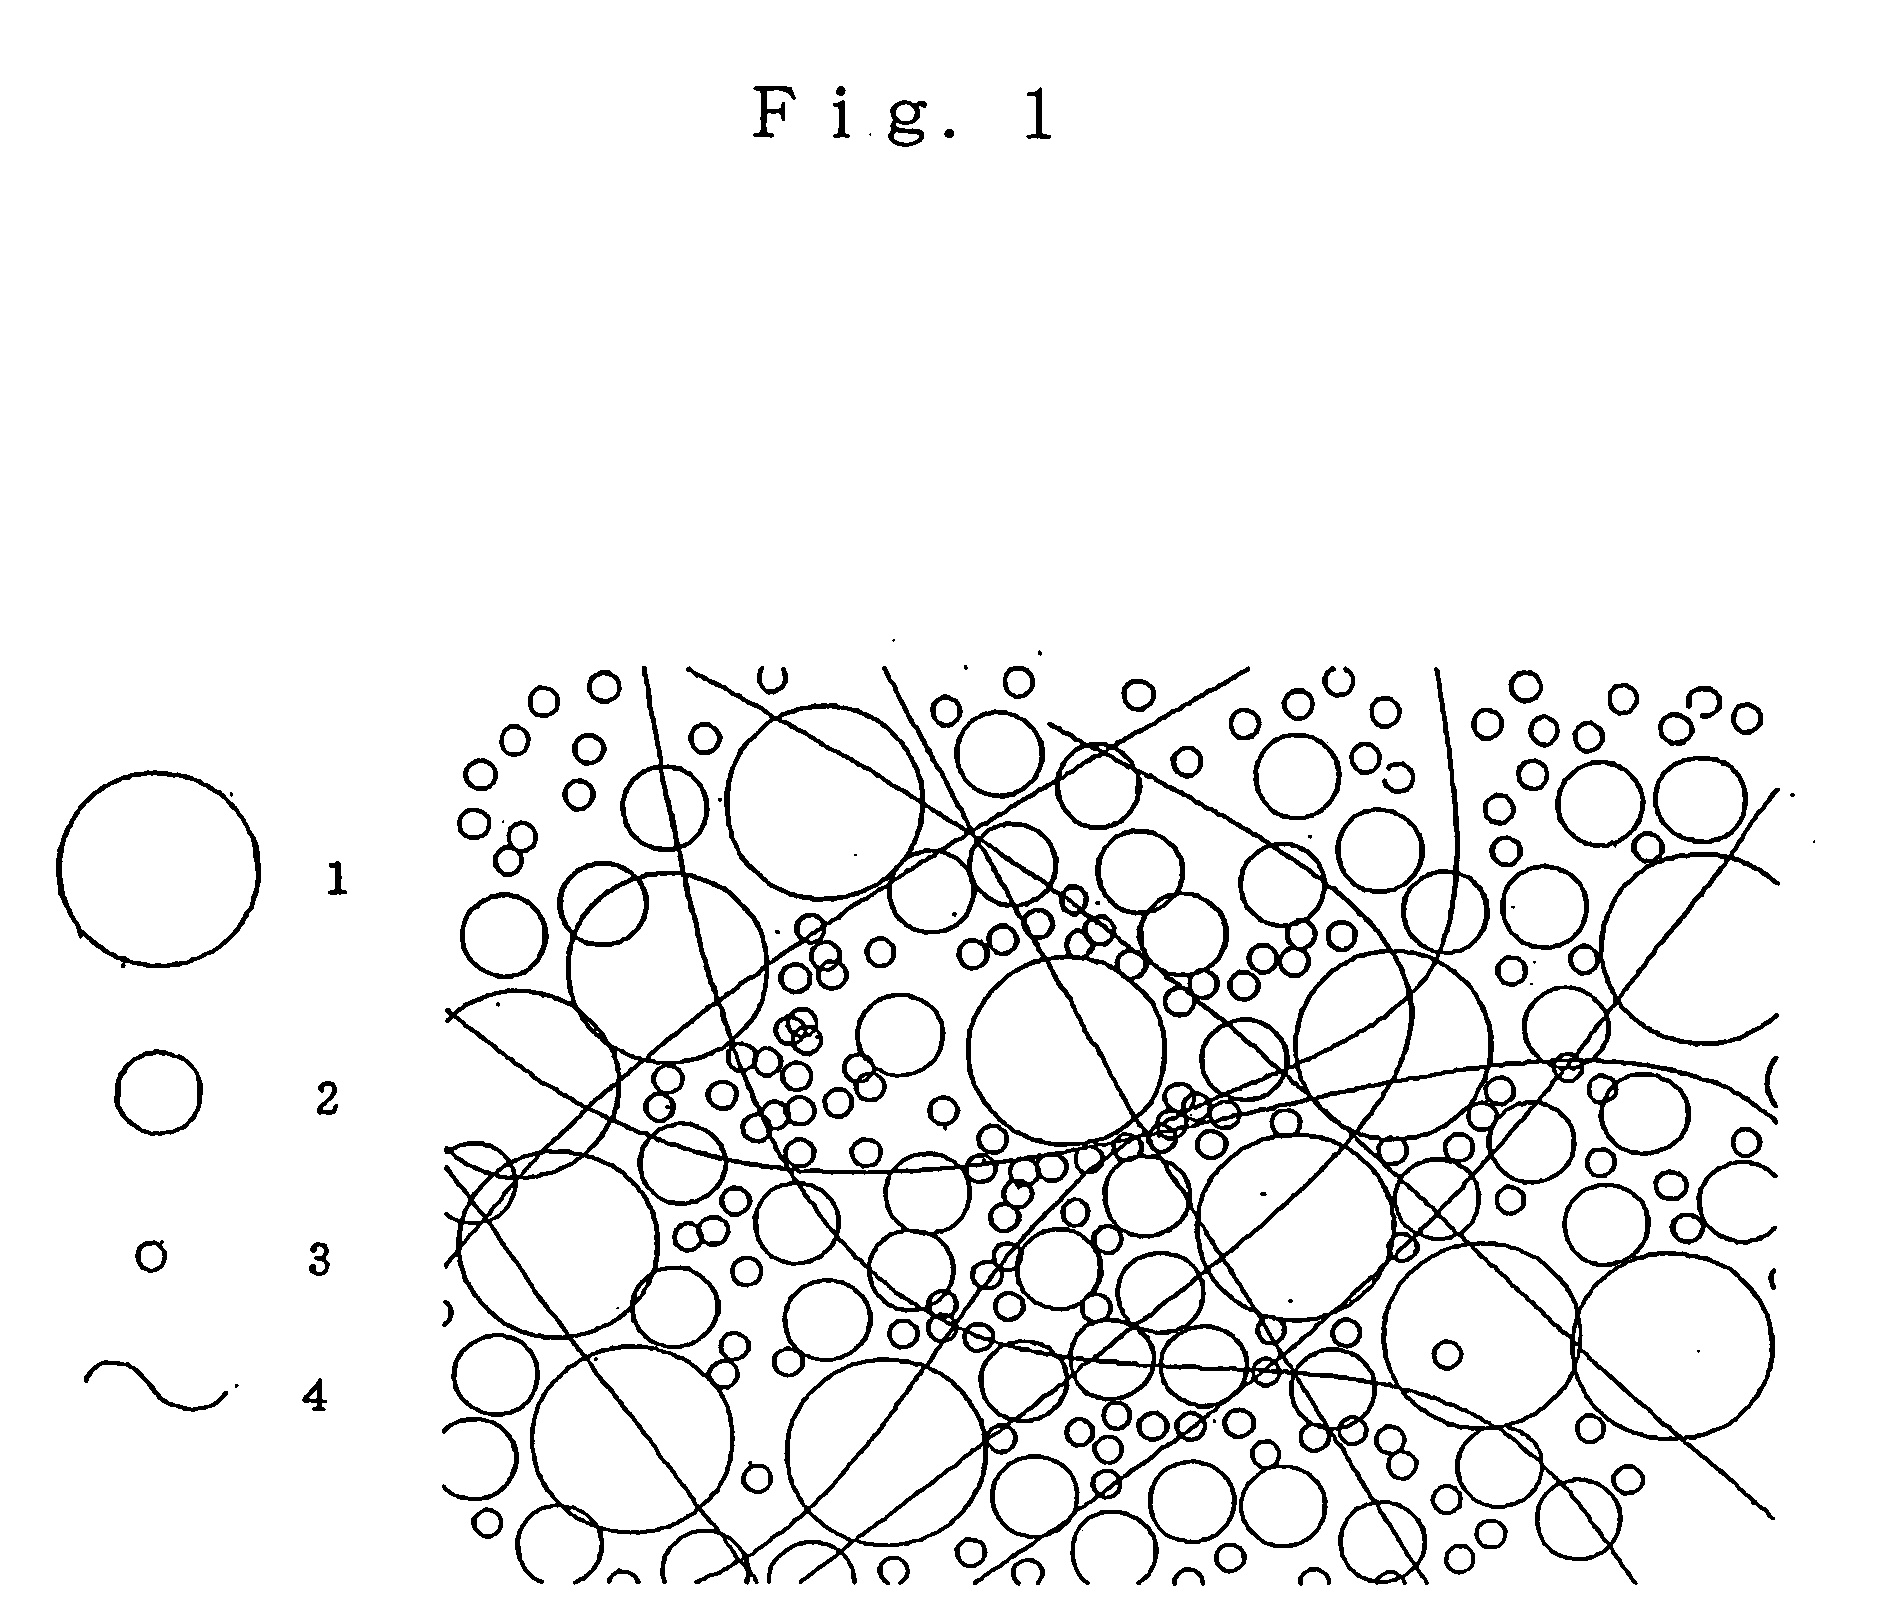 Electrode formulation for polarized electrode and method for preparation thereof, and polarized electrode using the eletrode formulation